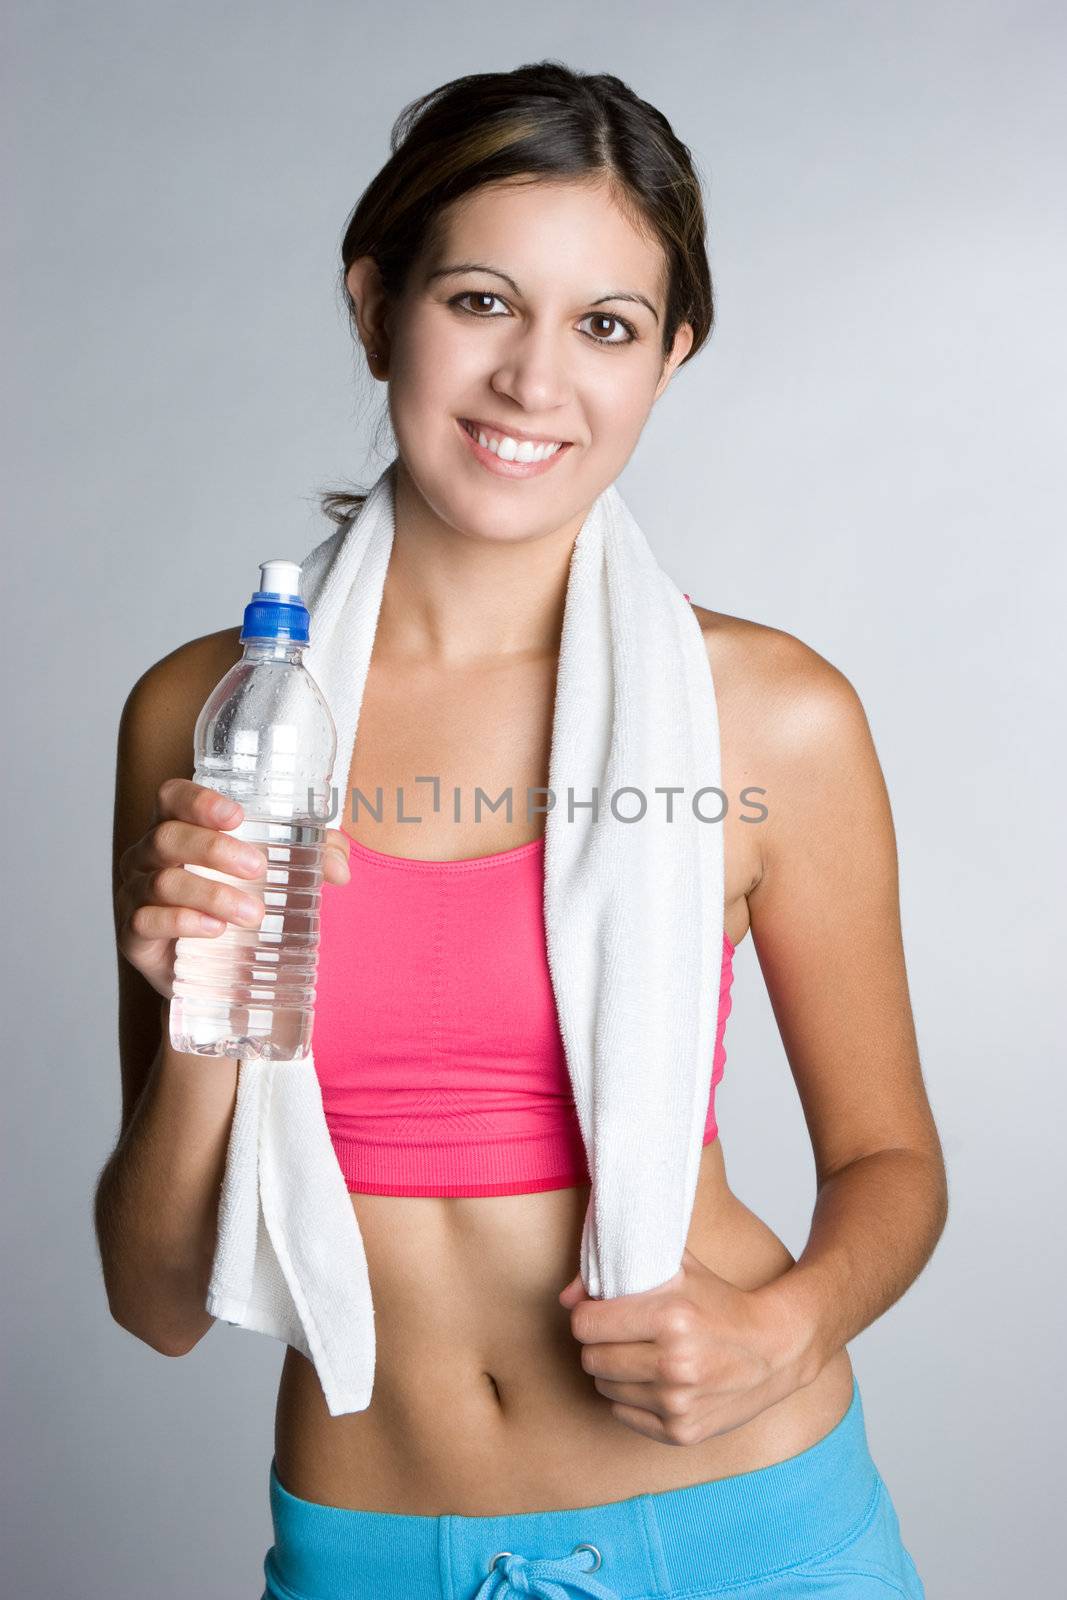 Fitness woman holding water bottle